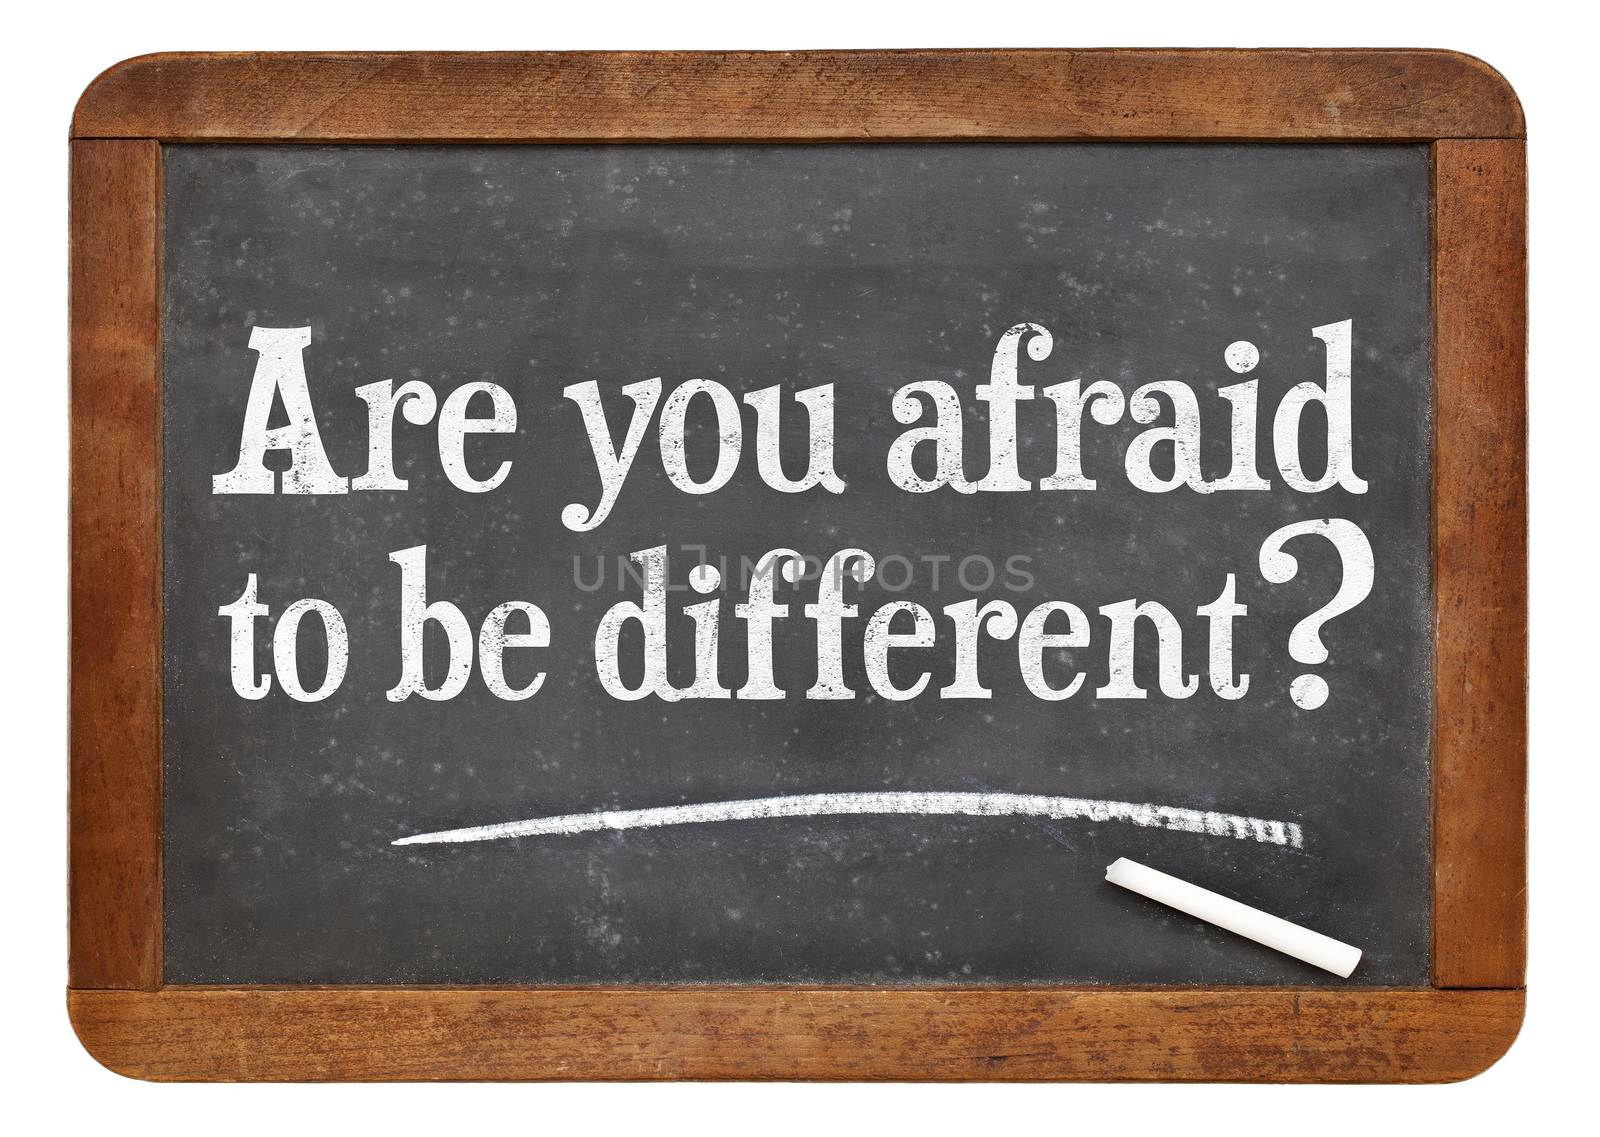 Are you afraid to be different question on a vintage slate blackboard